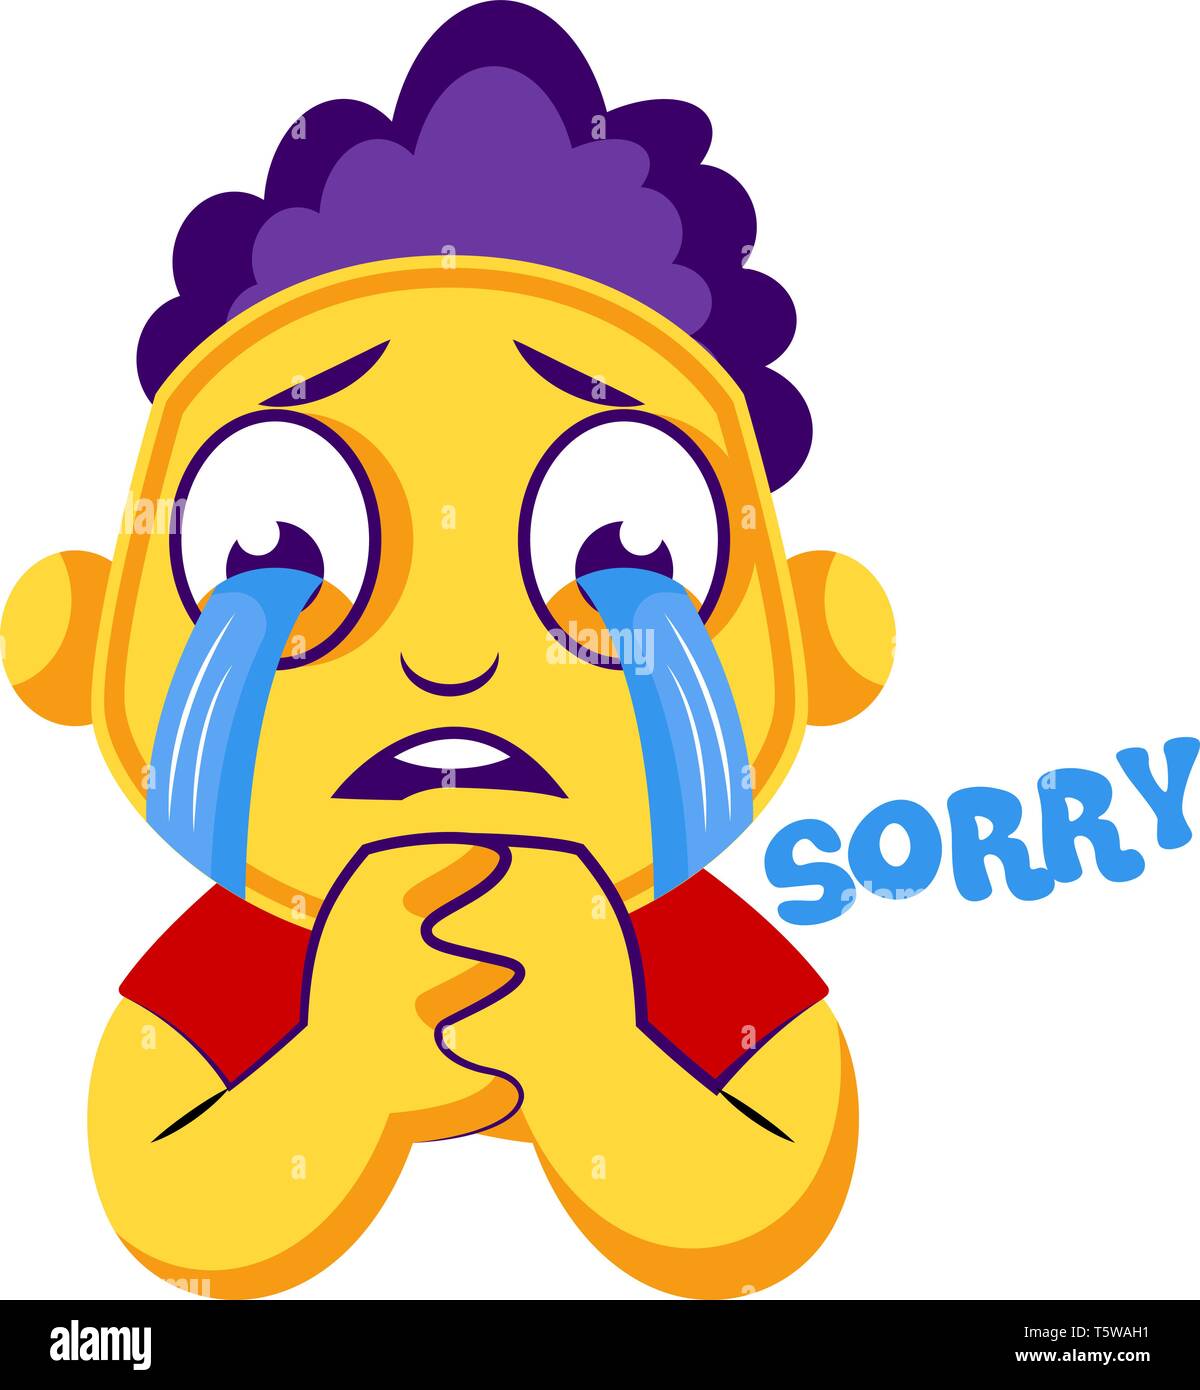 Yellow boy crying and saying sorry vector illustration on a white ...